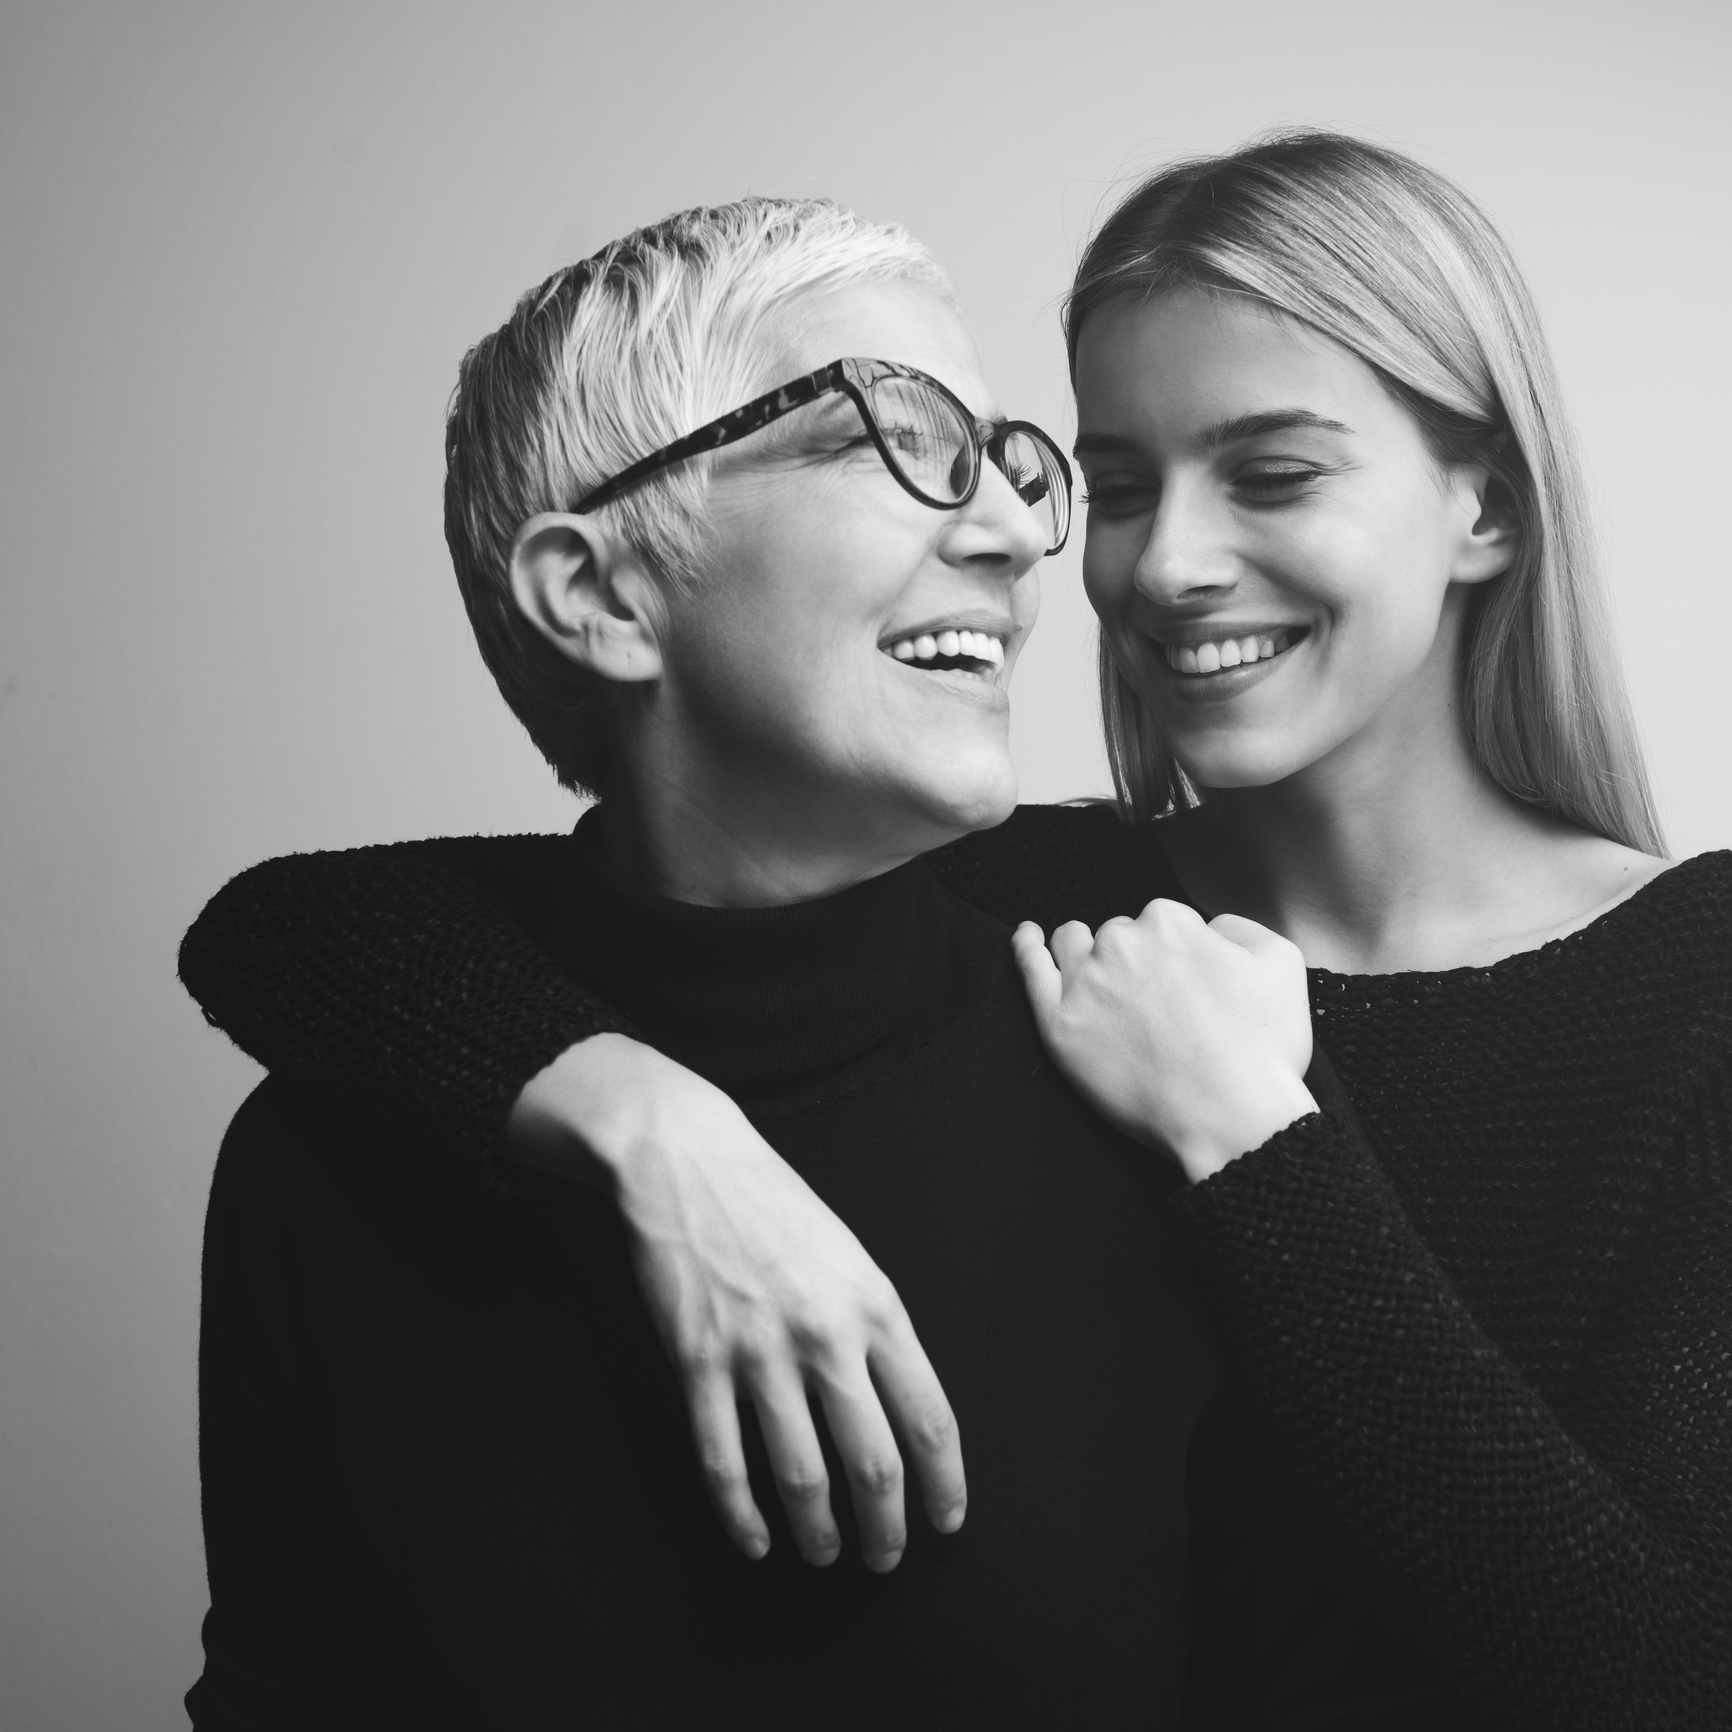 Studio shot of mother and daughter. Both of them wearing black. Black and white photo.